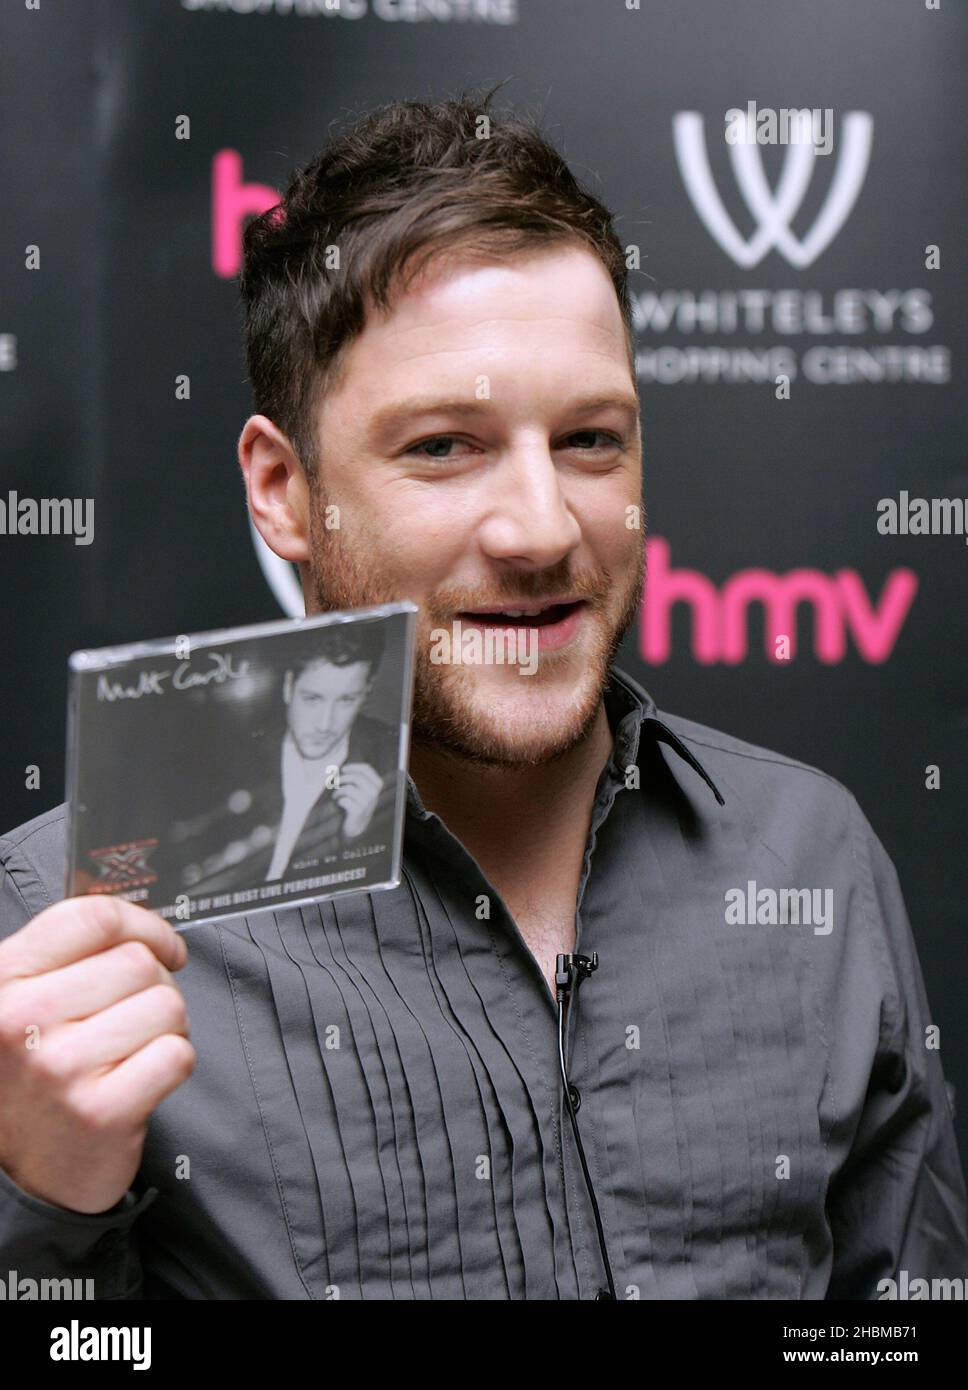 X Factor Winner Matt Cardle performs and signs copies of his debut CD at  HMV in Whiteley's Shopping Centre, London Stock Photo - Alamy